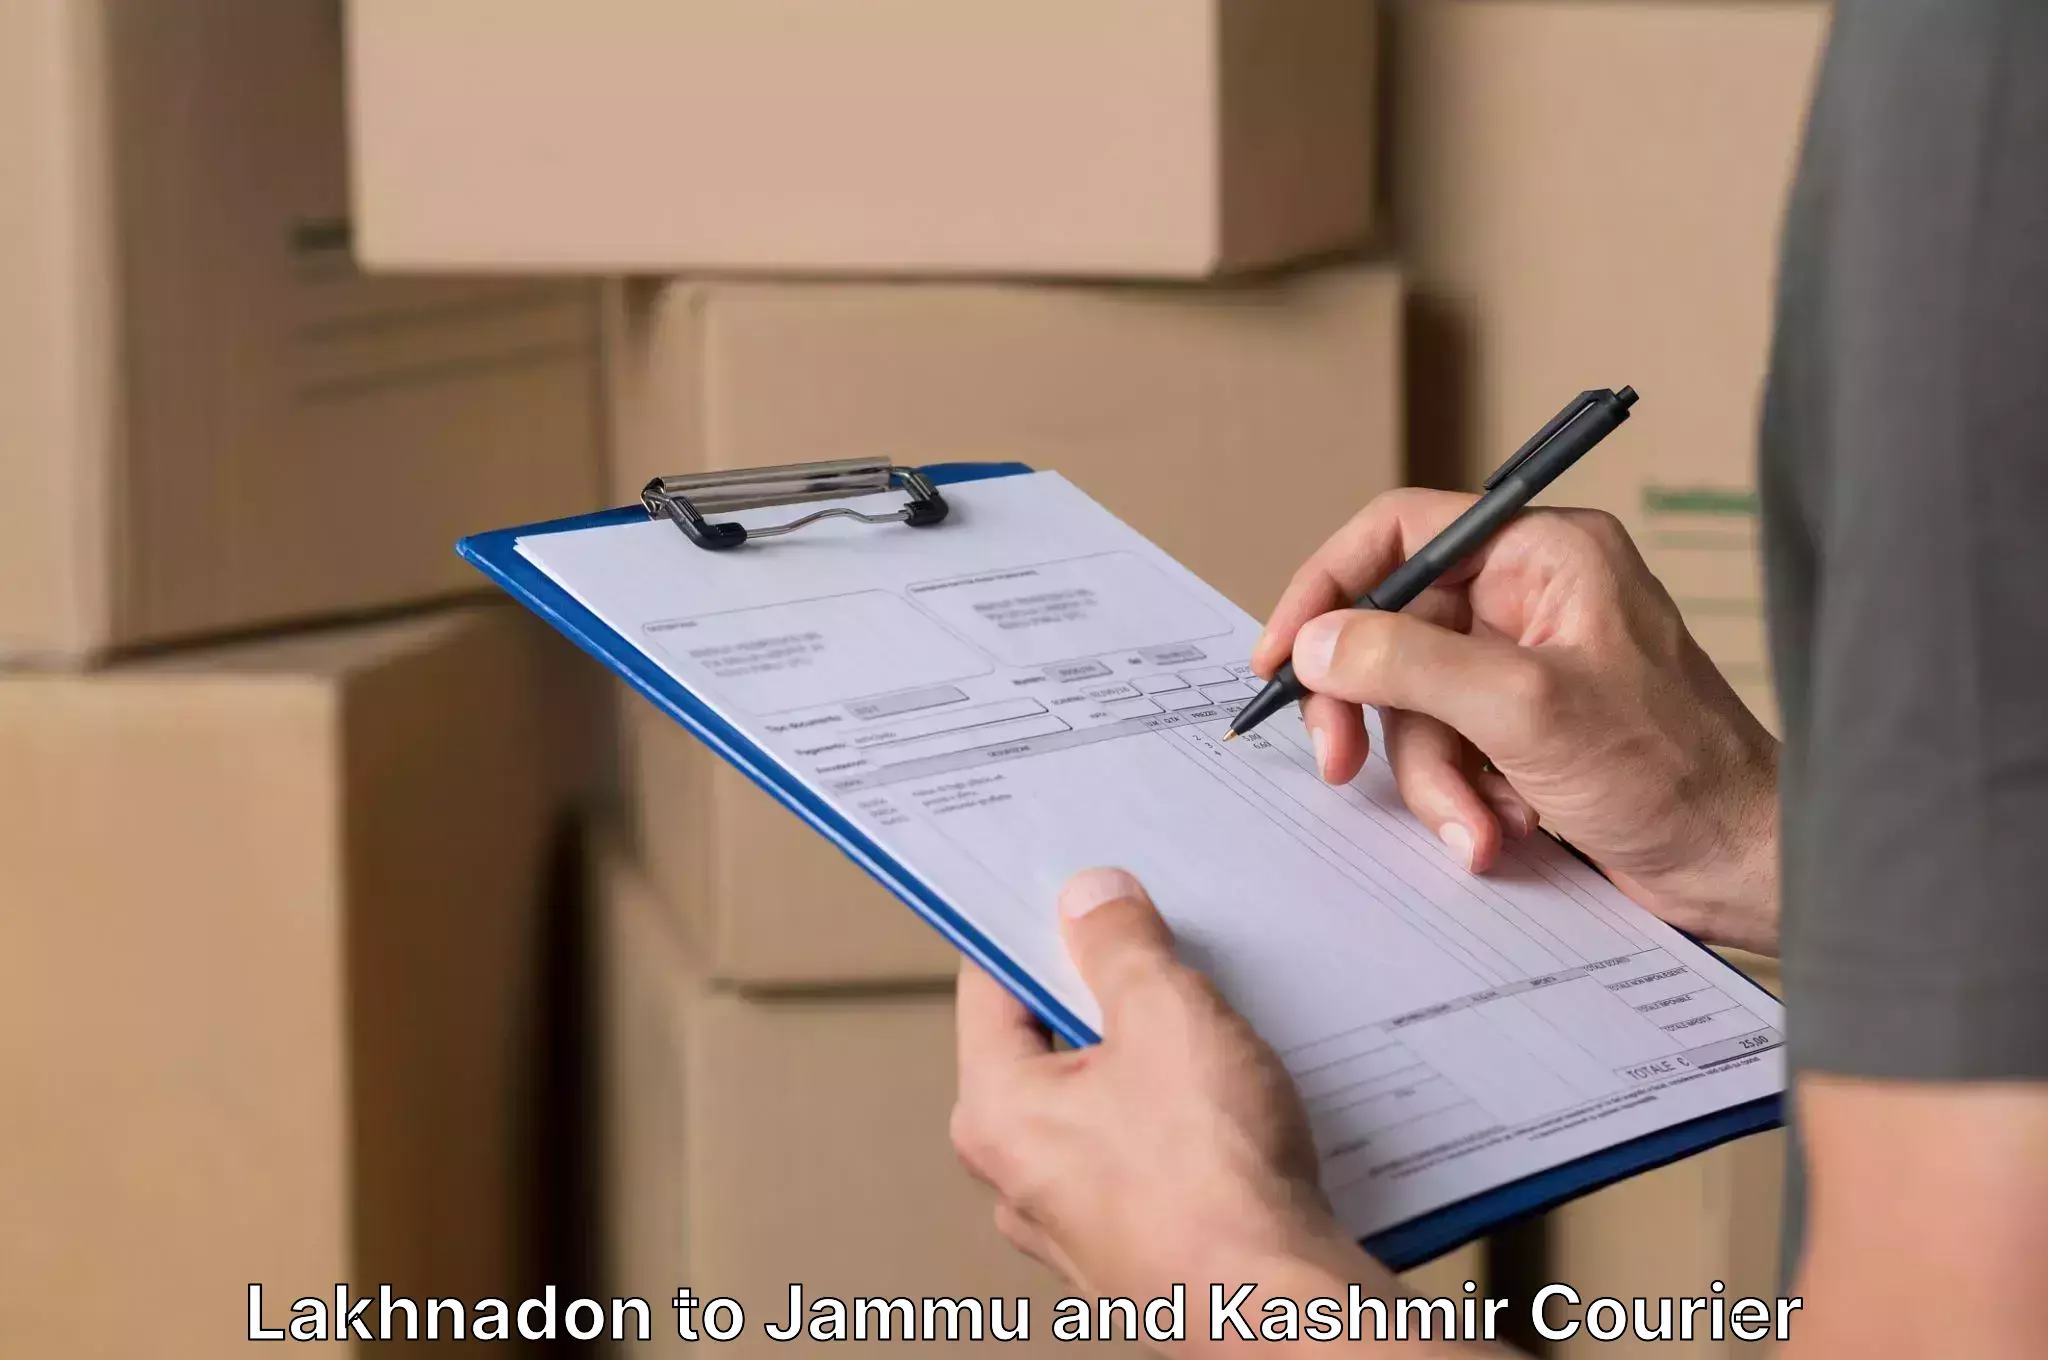 Quality relocation services in Lakhnadon to Shopian